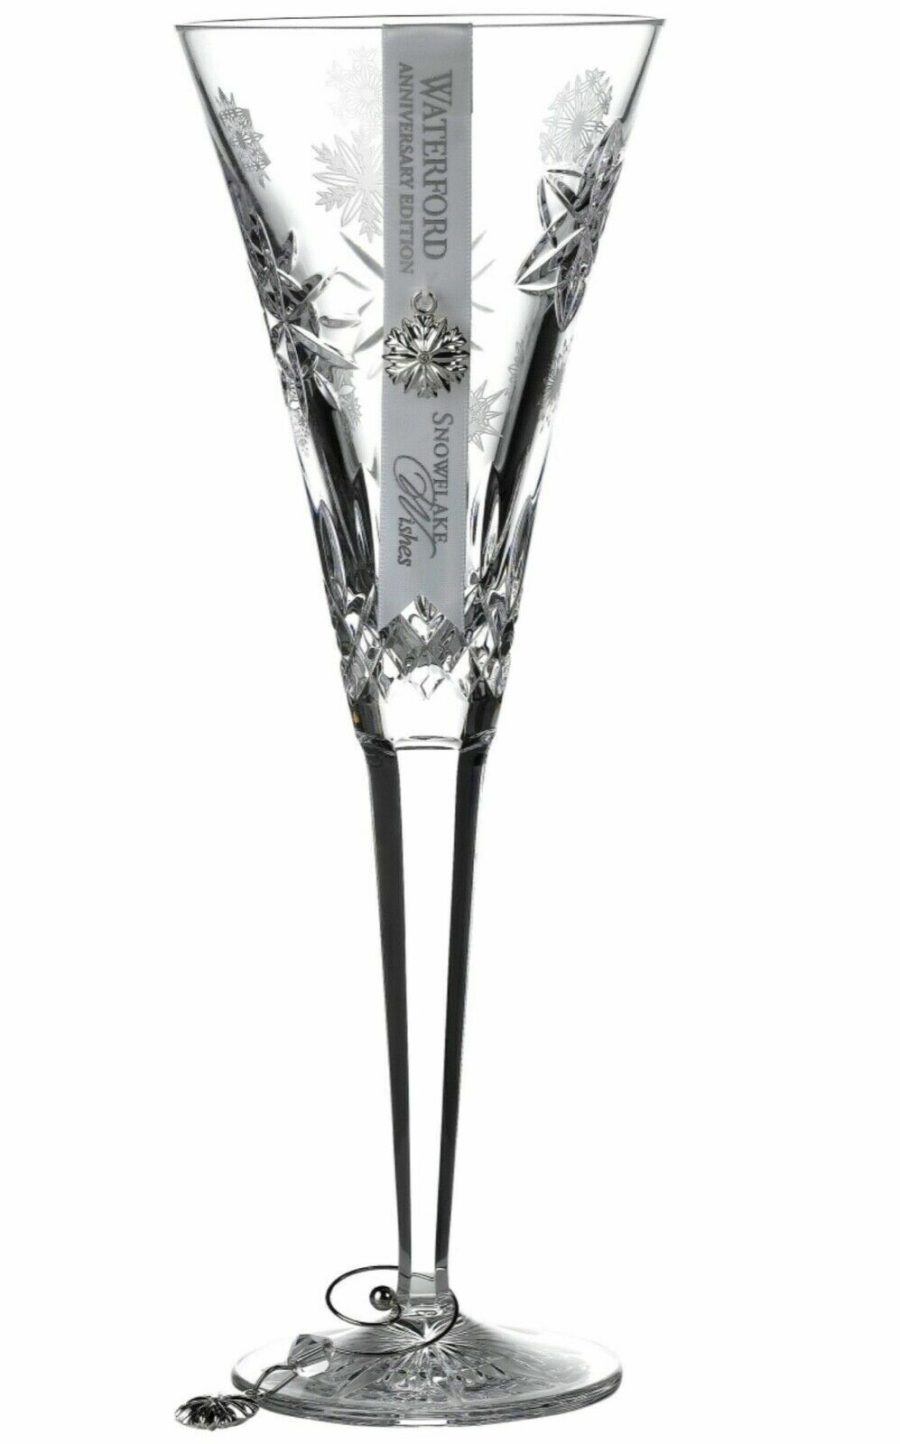 Waterford Crystal Snowflake Wishes Love Flute Wedding 2020 10th Ed #1055481 NEW